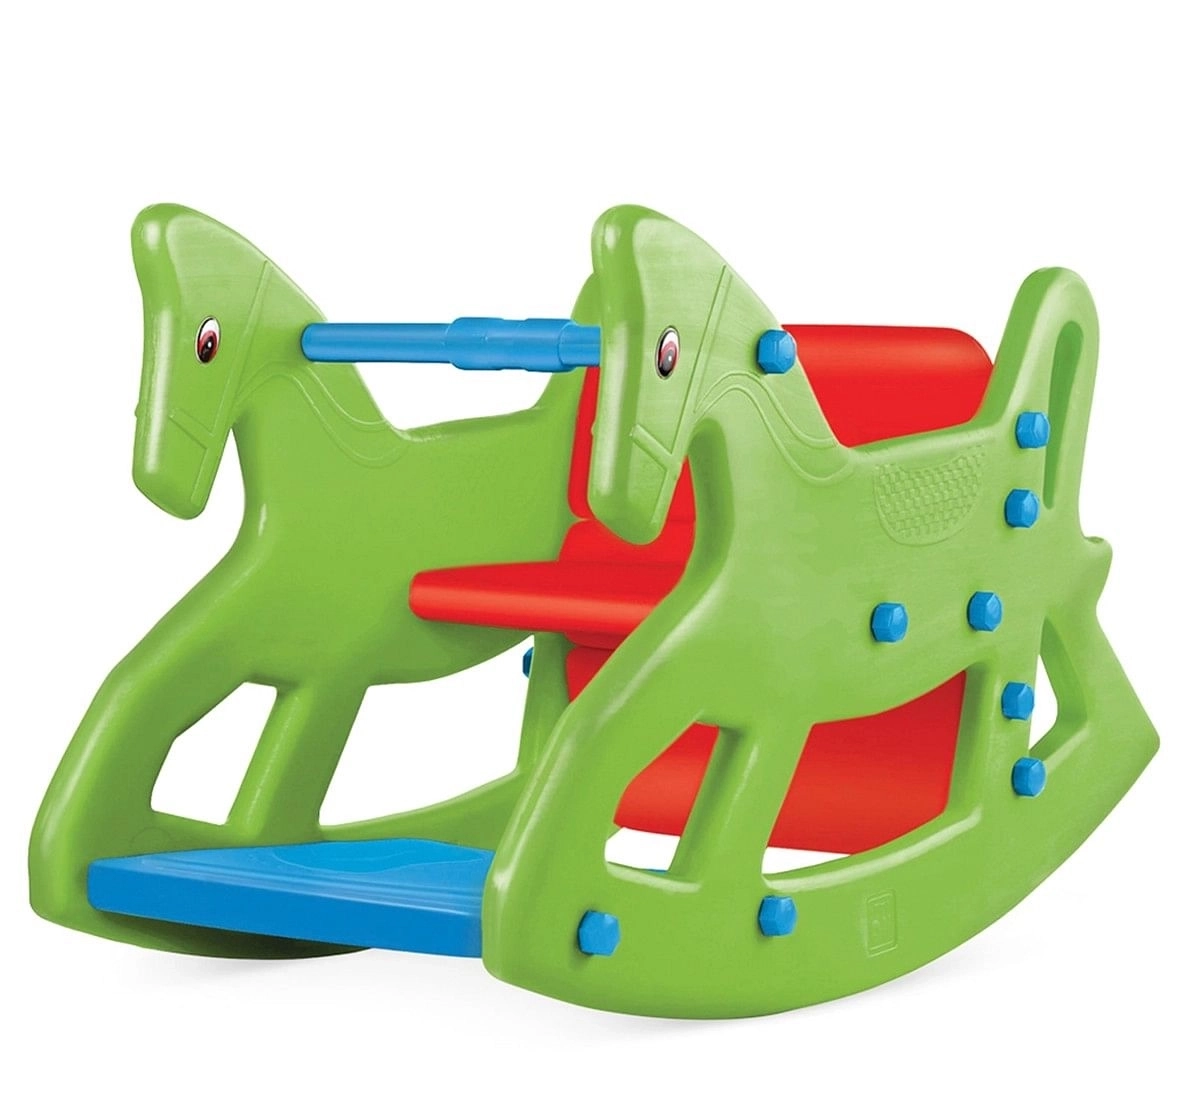 Ok Play Roxy 2-IN-1 Rocking Chair Rocking Plastic Chair Rocker and Bouncer Green 3Y+